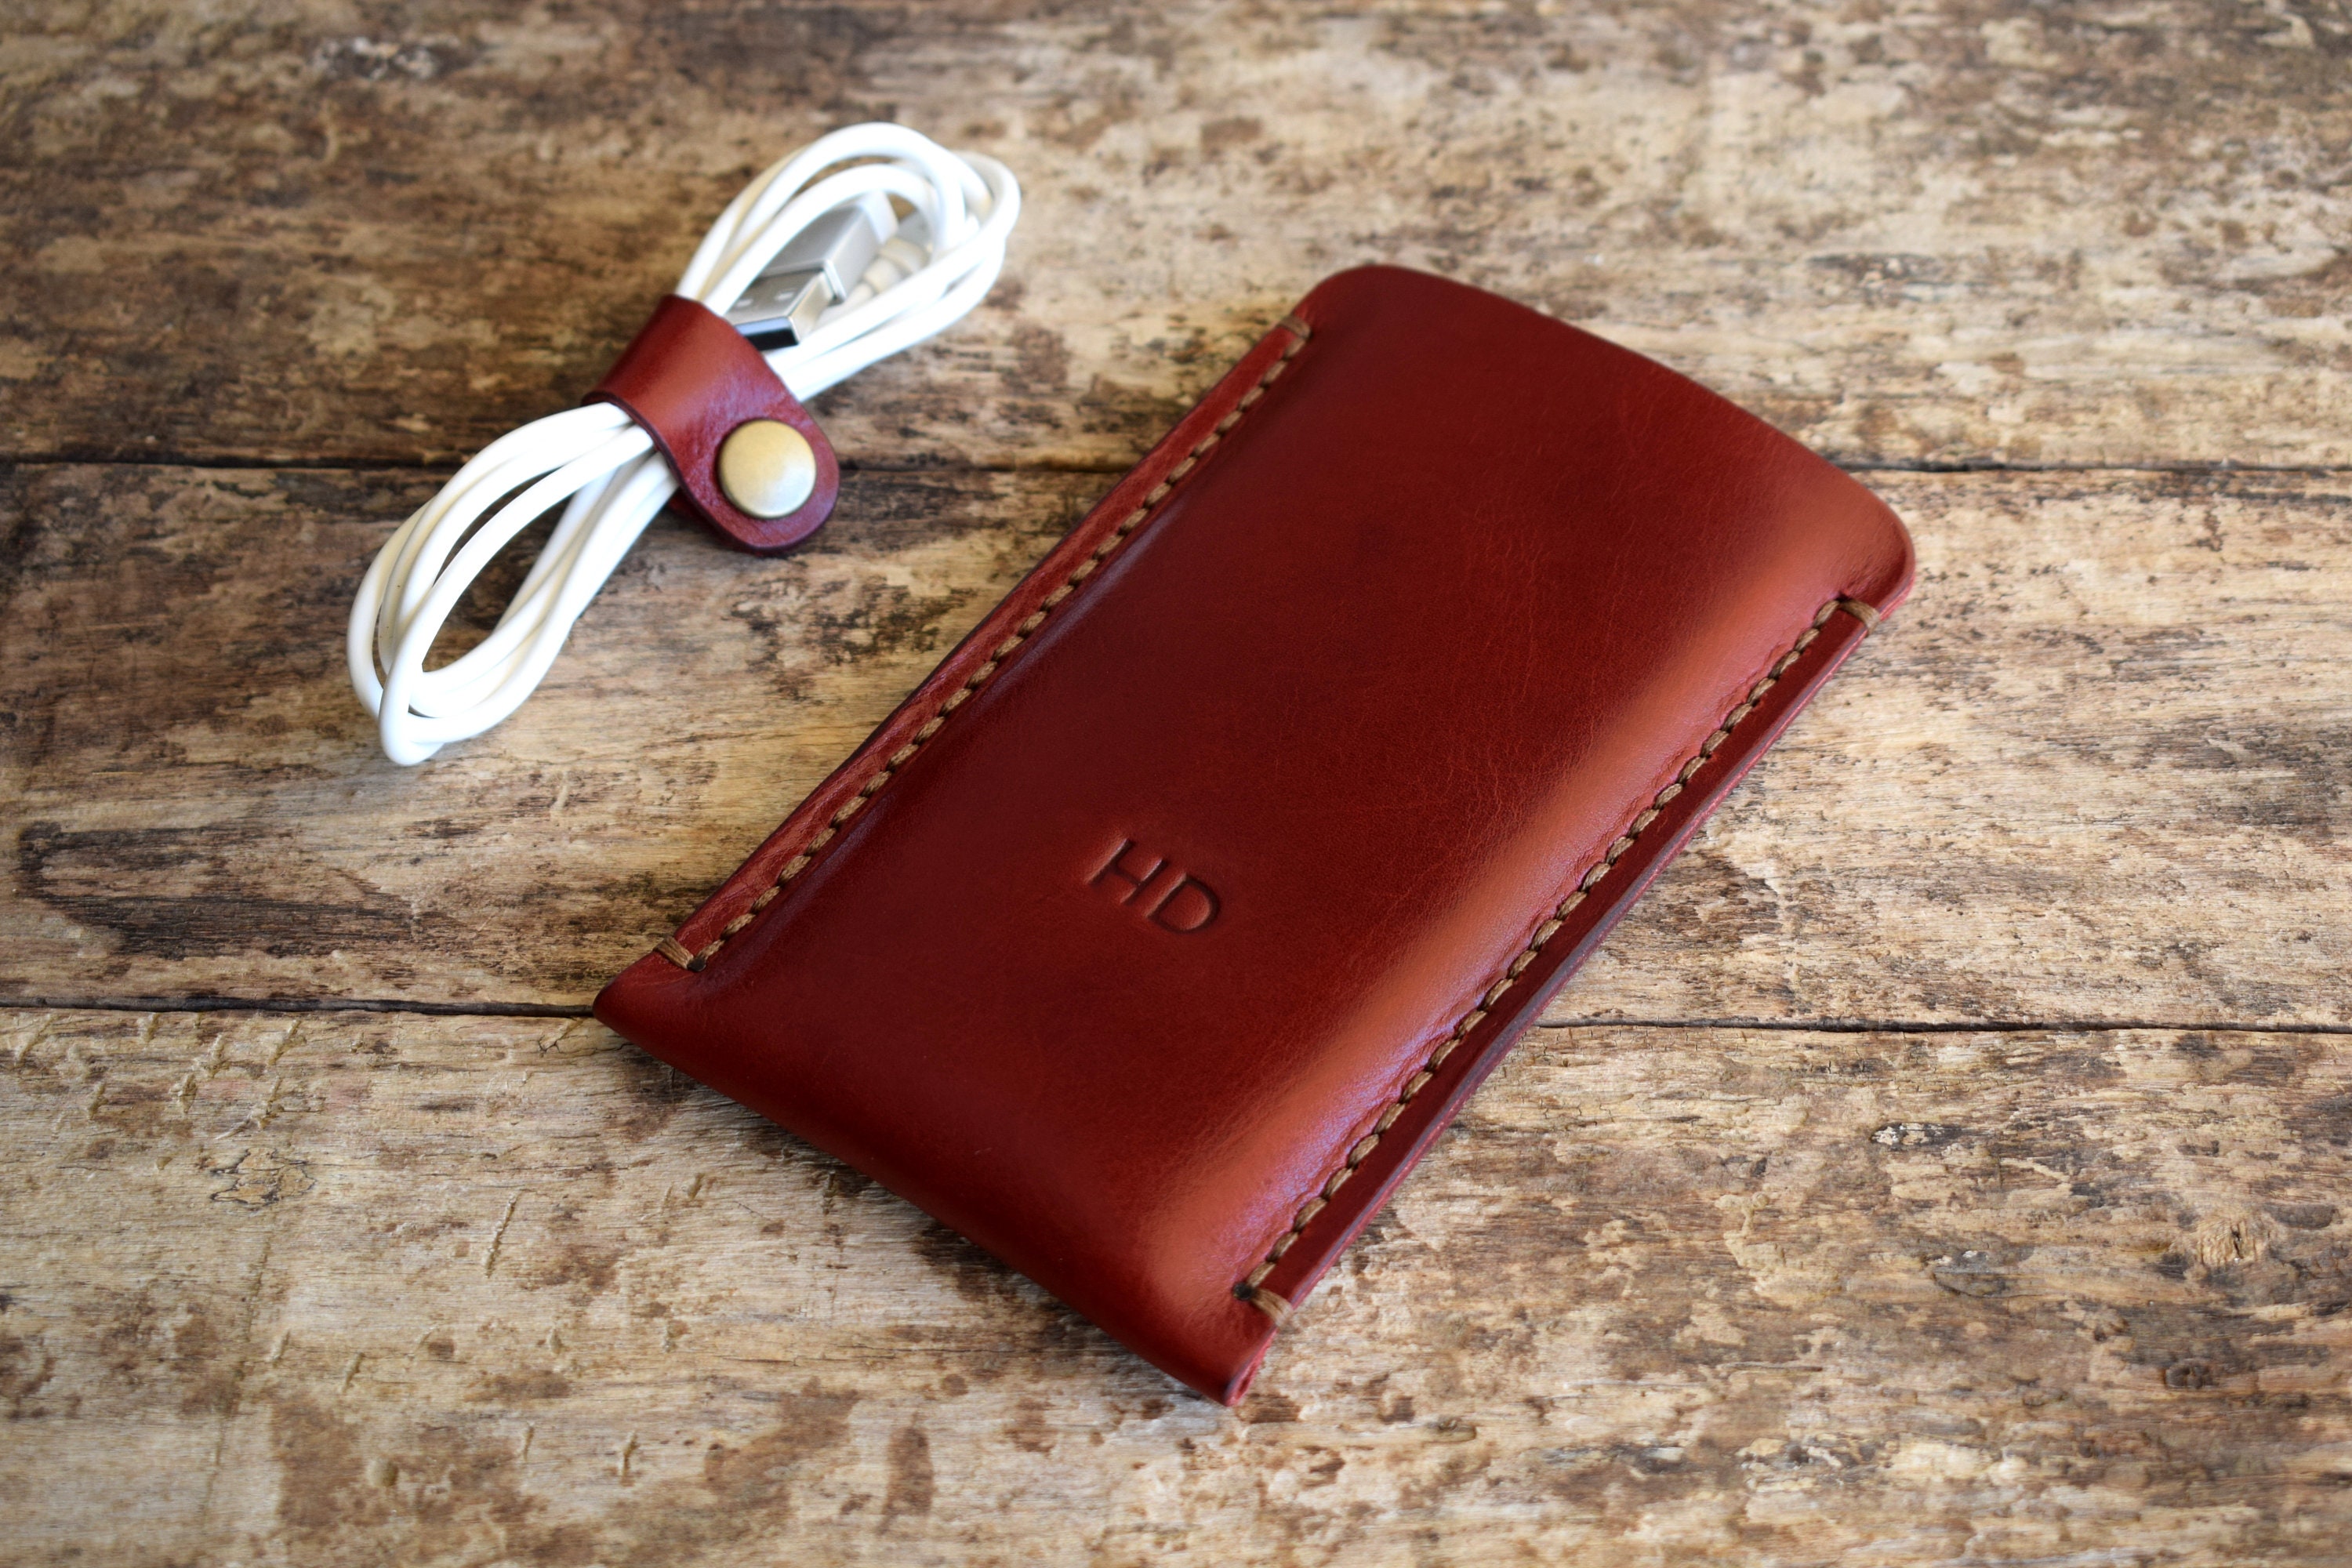 Leicke  Manna Universal Real Leather Phone Pouch Skin Wallet Pocket